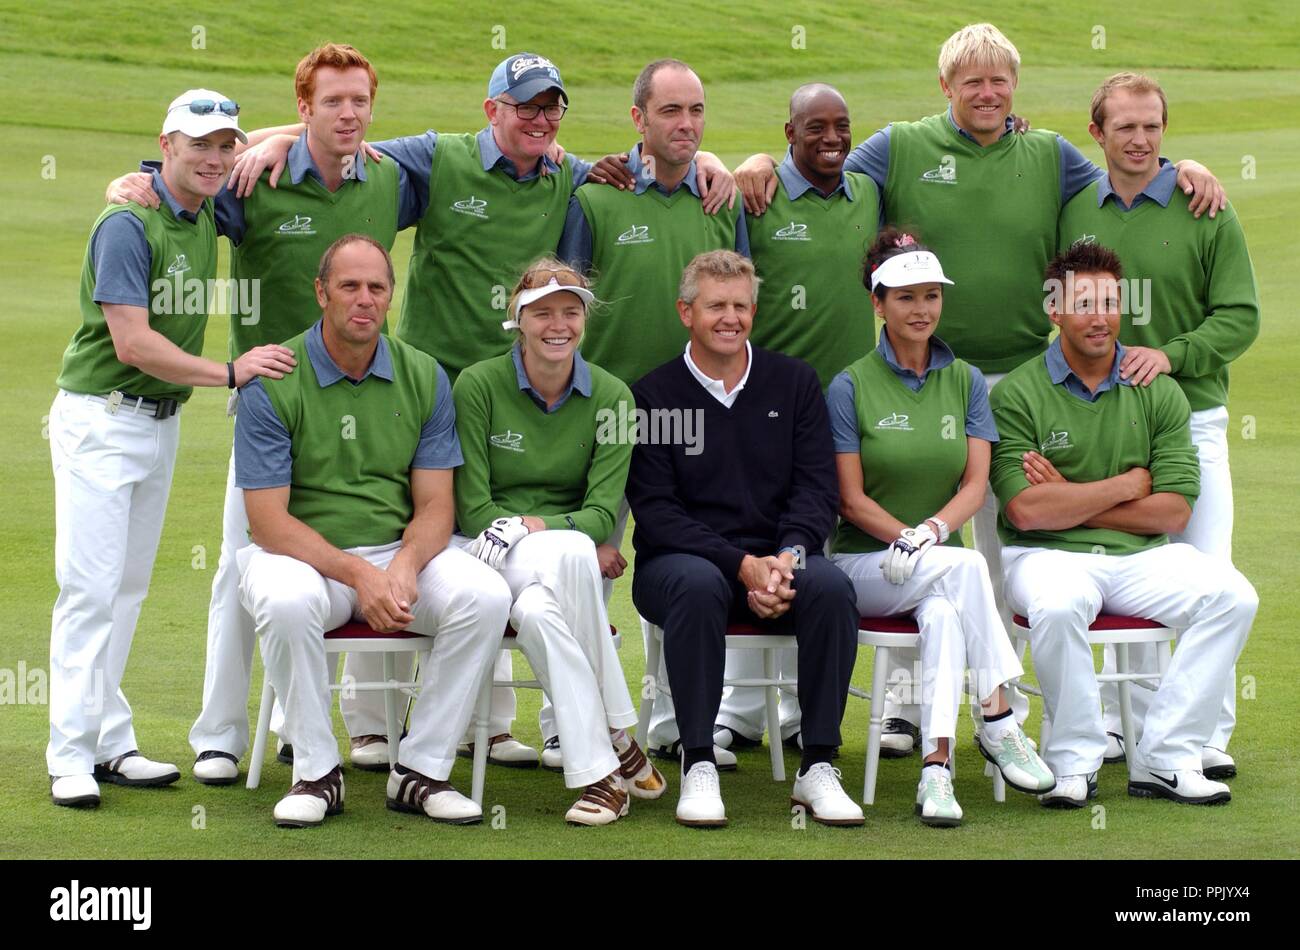 Sky One Allstar Cup at The Celtic Manor Resort, Newport, ( Saturday 27/8/05 ). The European Team.  Left to right standing, Ronan Keating, Damian Lewis,  Chris Evans, James Nesbitt., Ian Wright, Peter Schmeichel and Matt Dawson. Seated left to right are Sir Steve Redgrave,  Jodie Kidd, Colin Montgomerie, Welsh born Holywood actress Catherine Zeta Jones and Gavin Henson,. Stock Photo